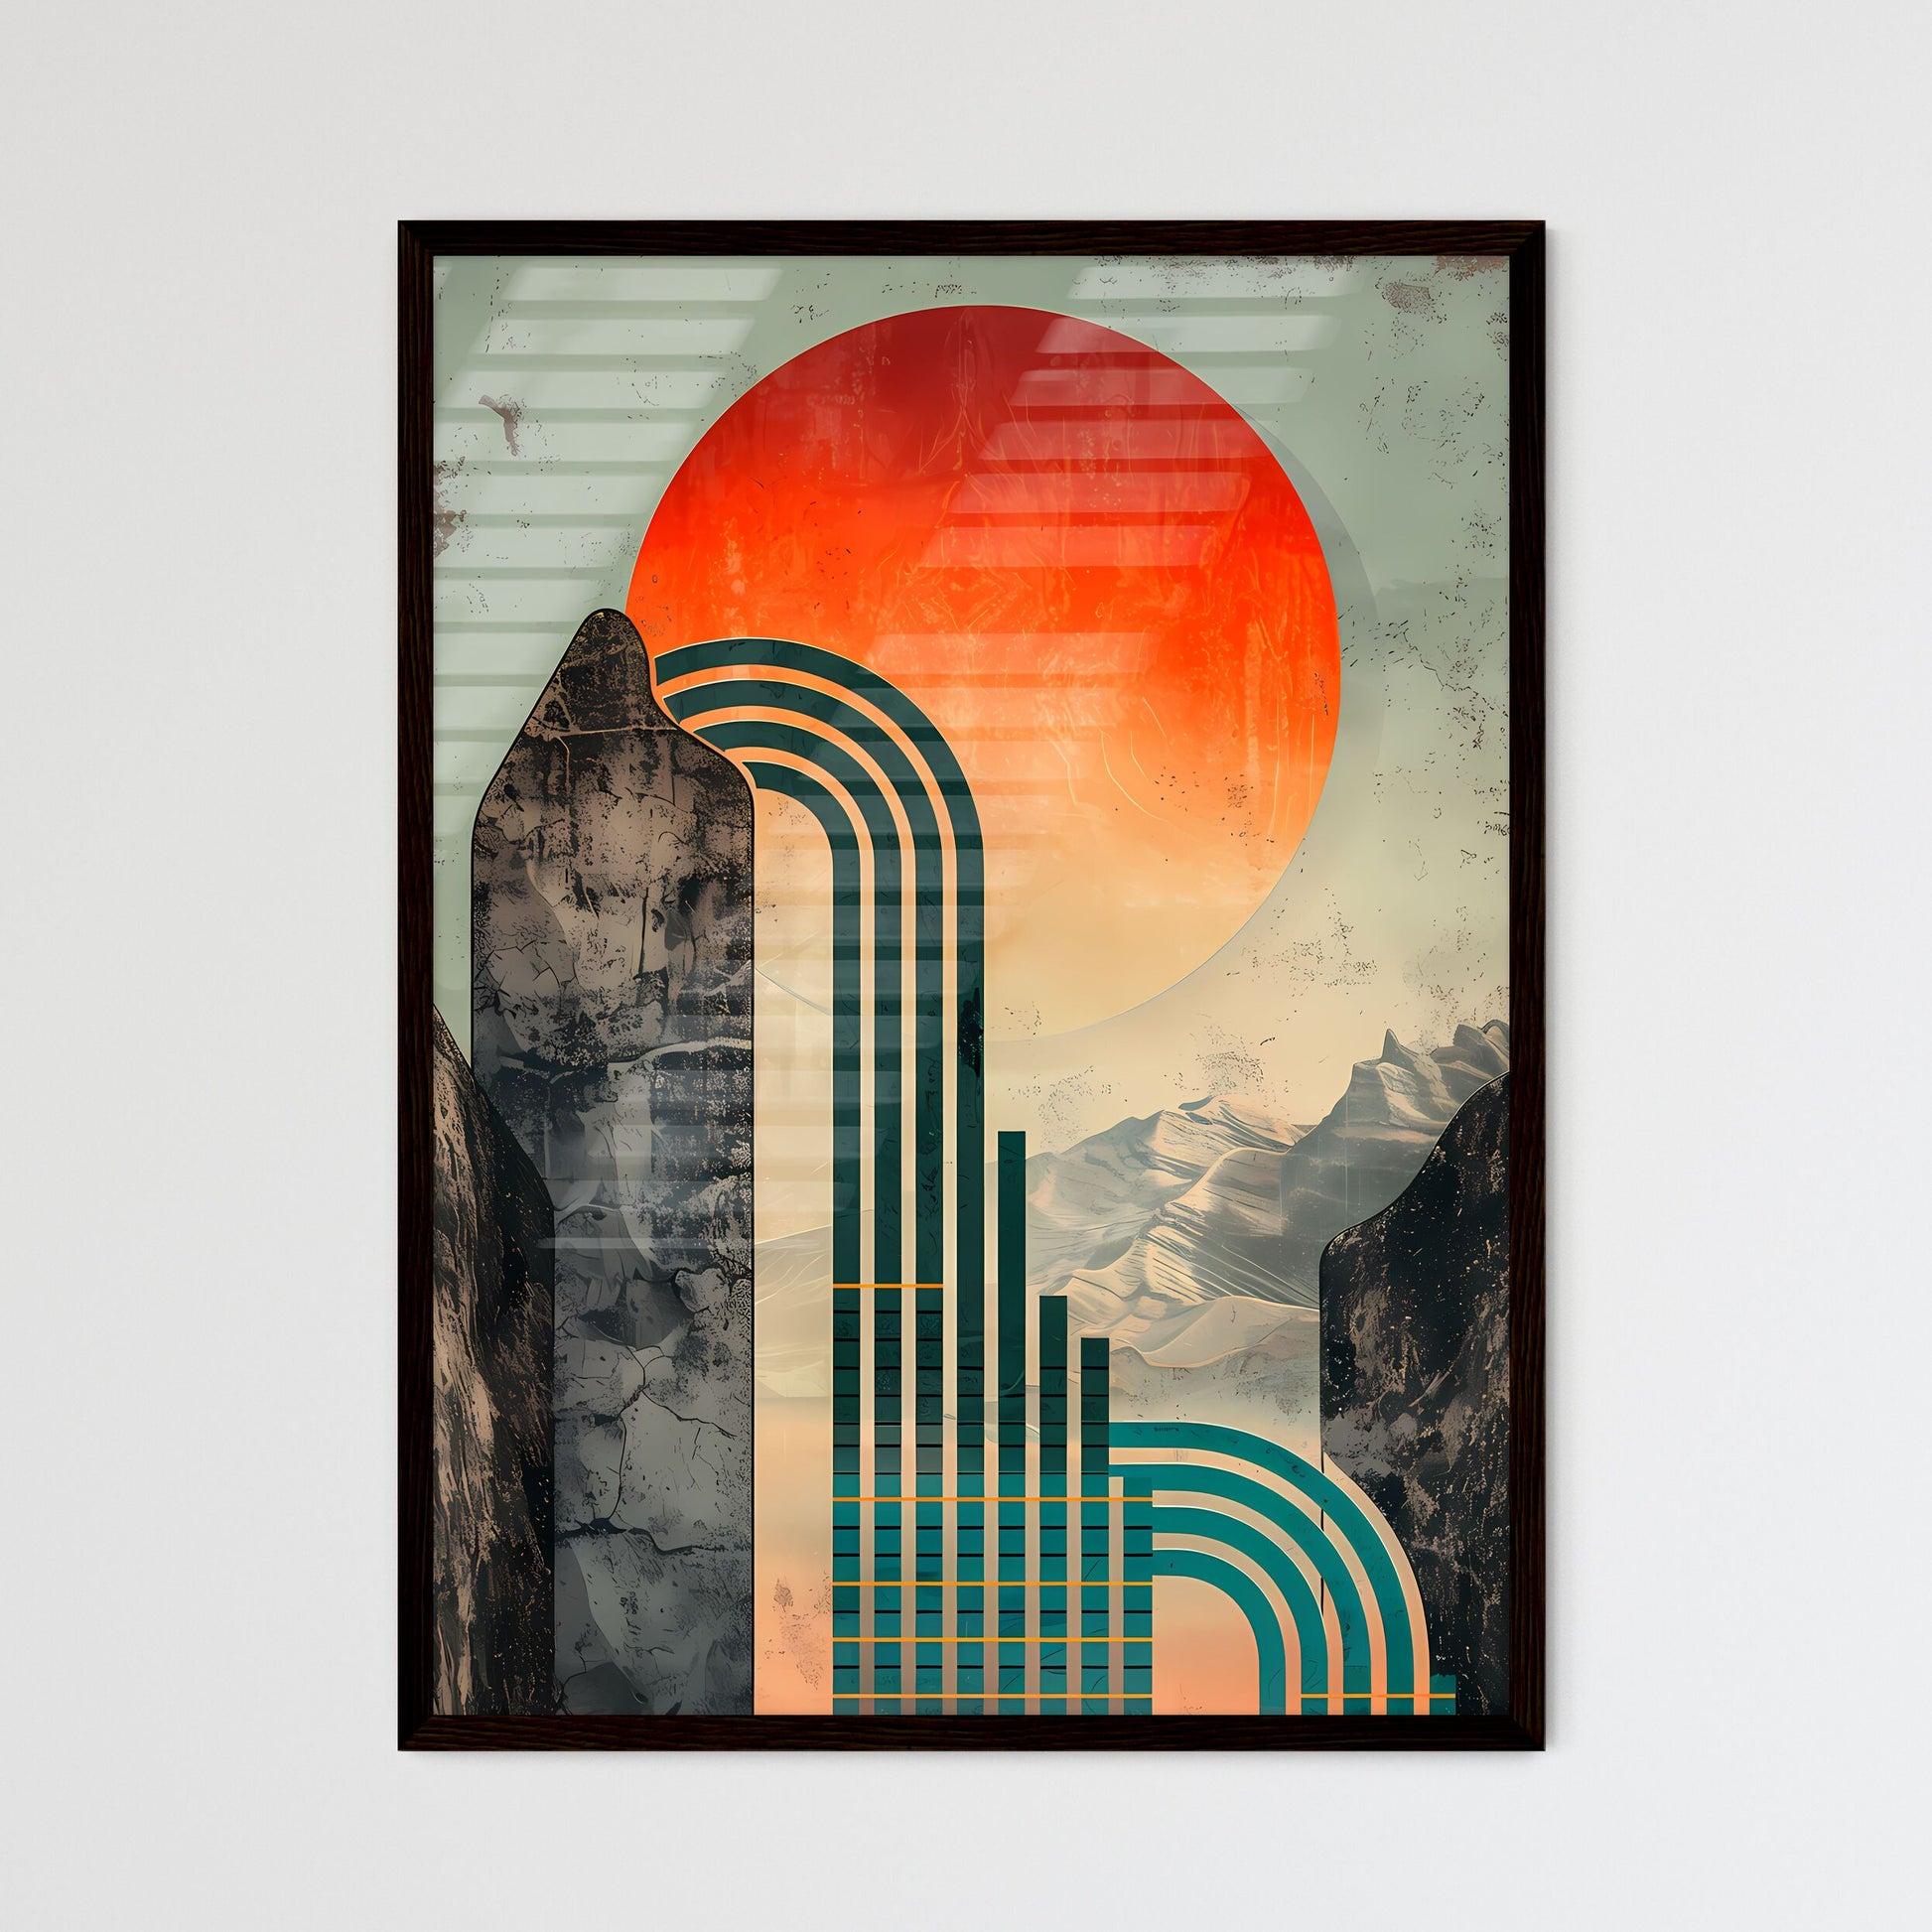 Vibrant Vintage Poster-Style Painting: Flowing Lines, Metallic Rectangles, Warmcore, Stimwave, Mesopotamian Art Inspired Mountains and Sun Default Title